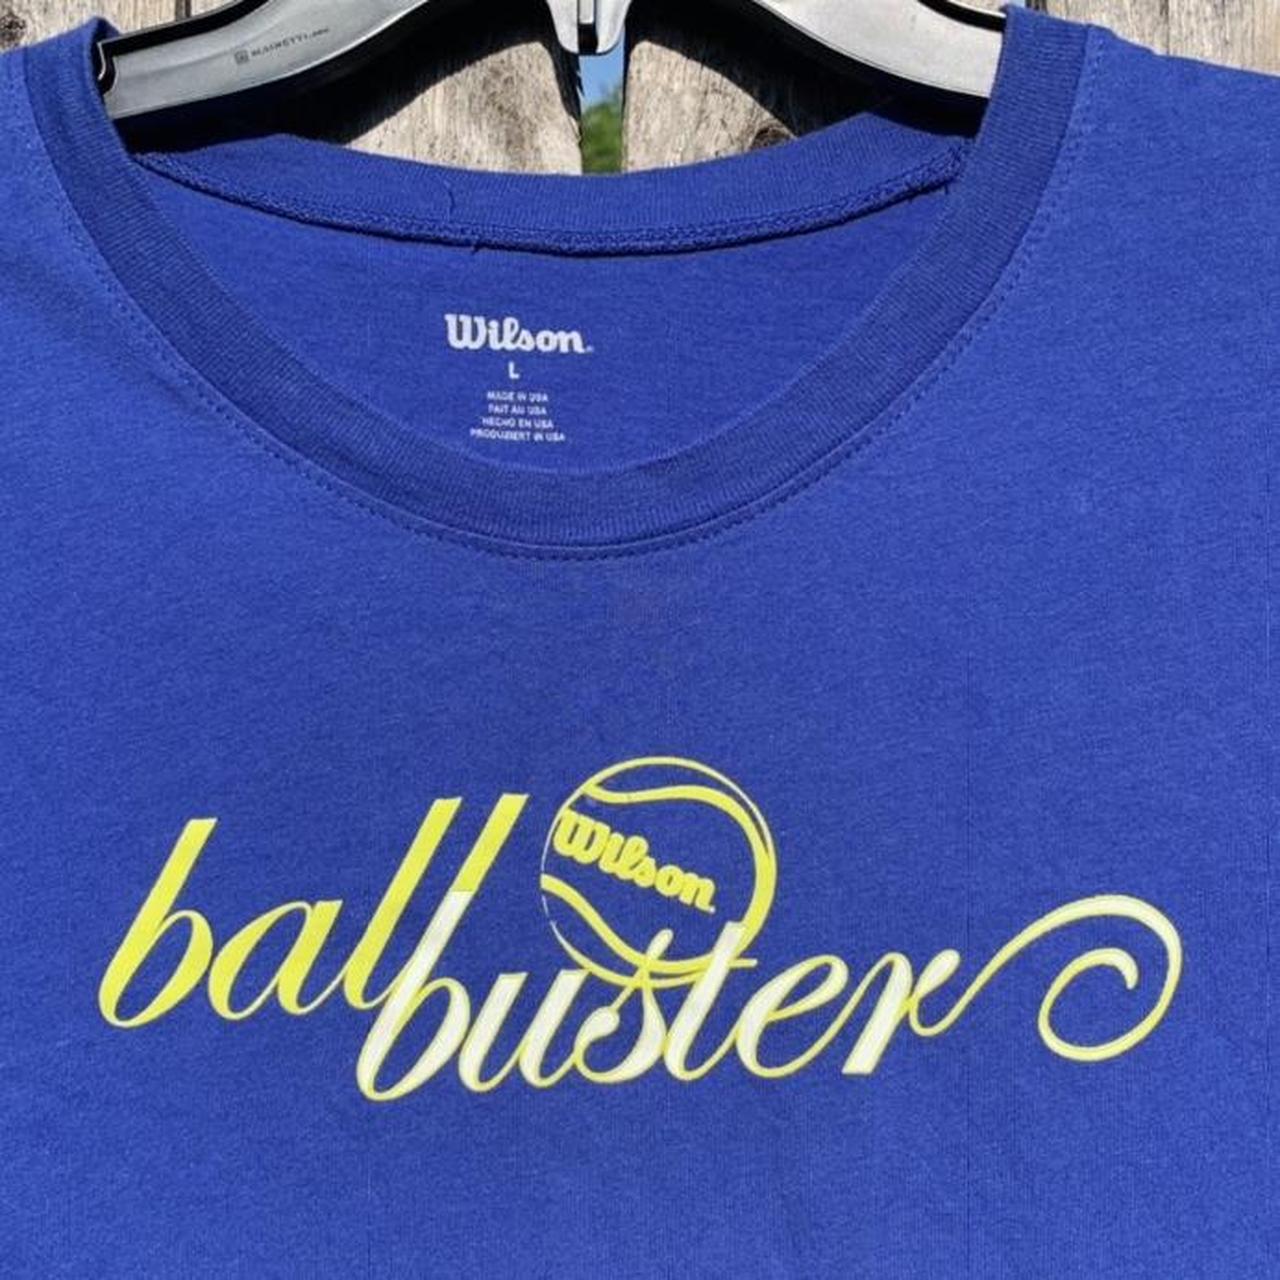 Product Image 2 - Y2K Wilson Tee

Ball 🏐 buster